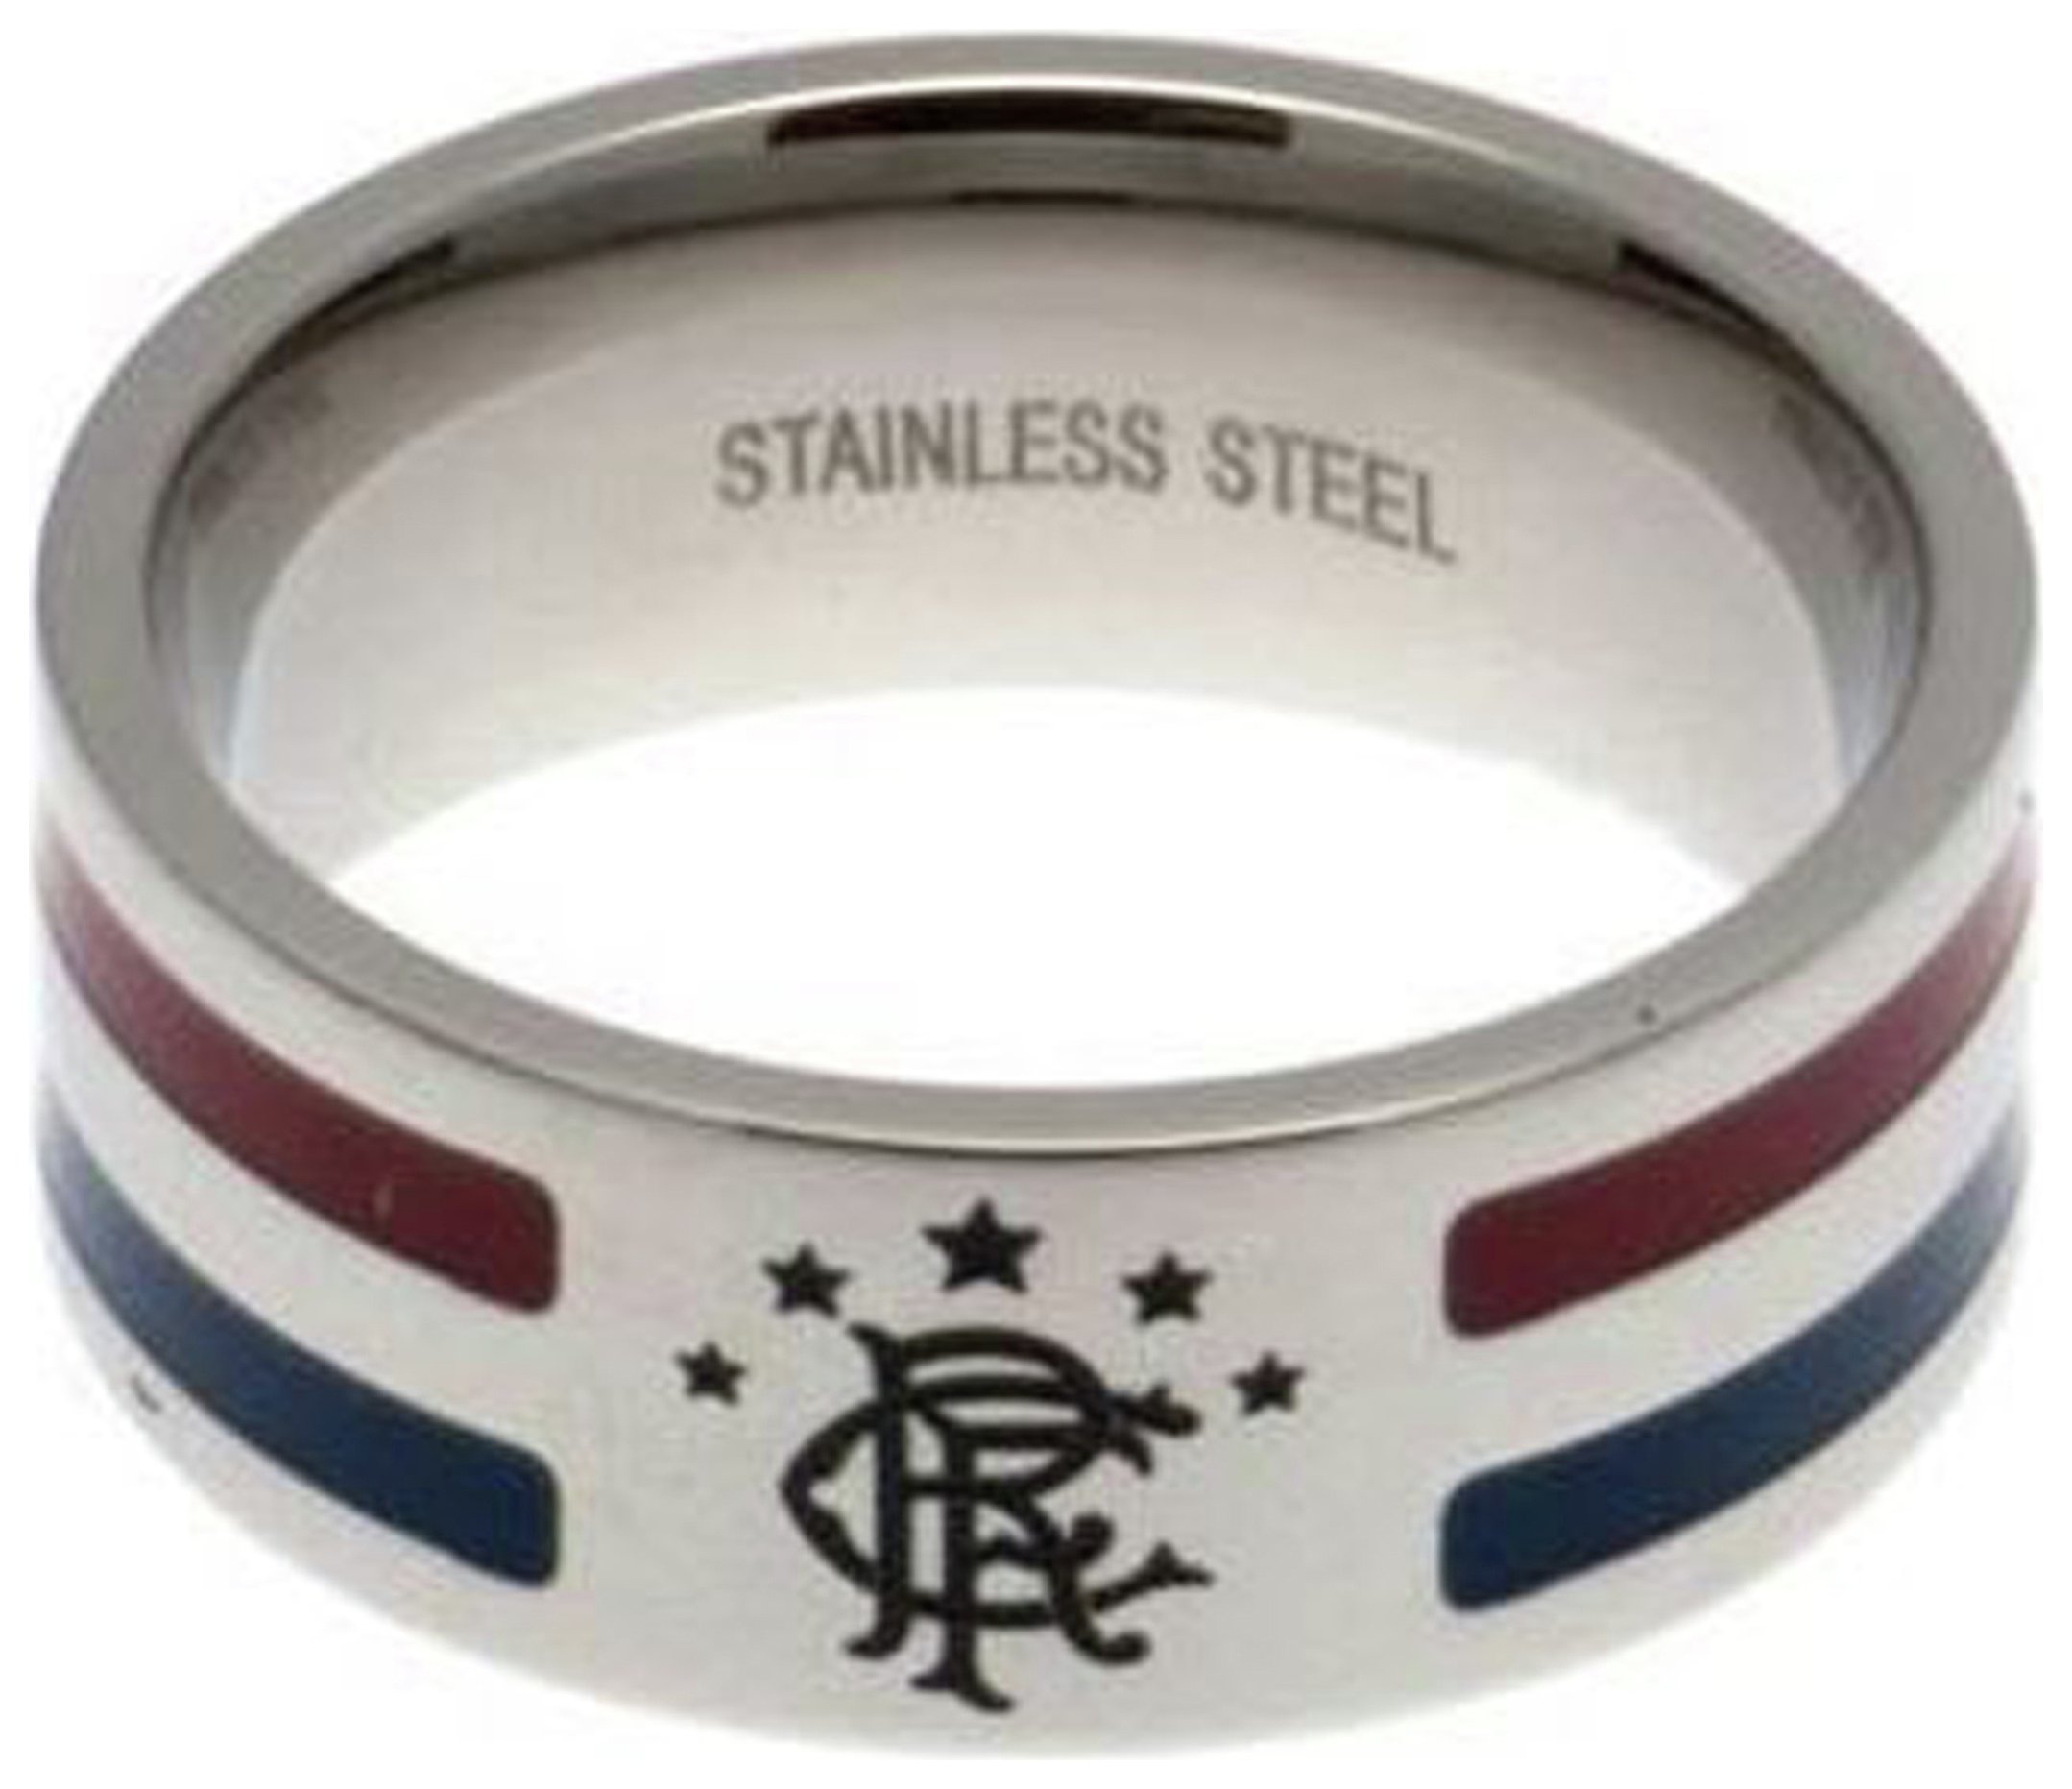 Stainless Steel Rangers Striped Ring - Size U